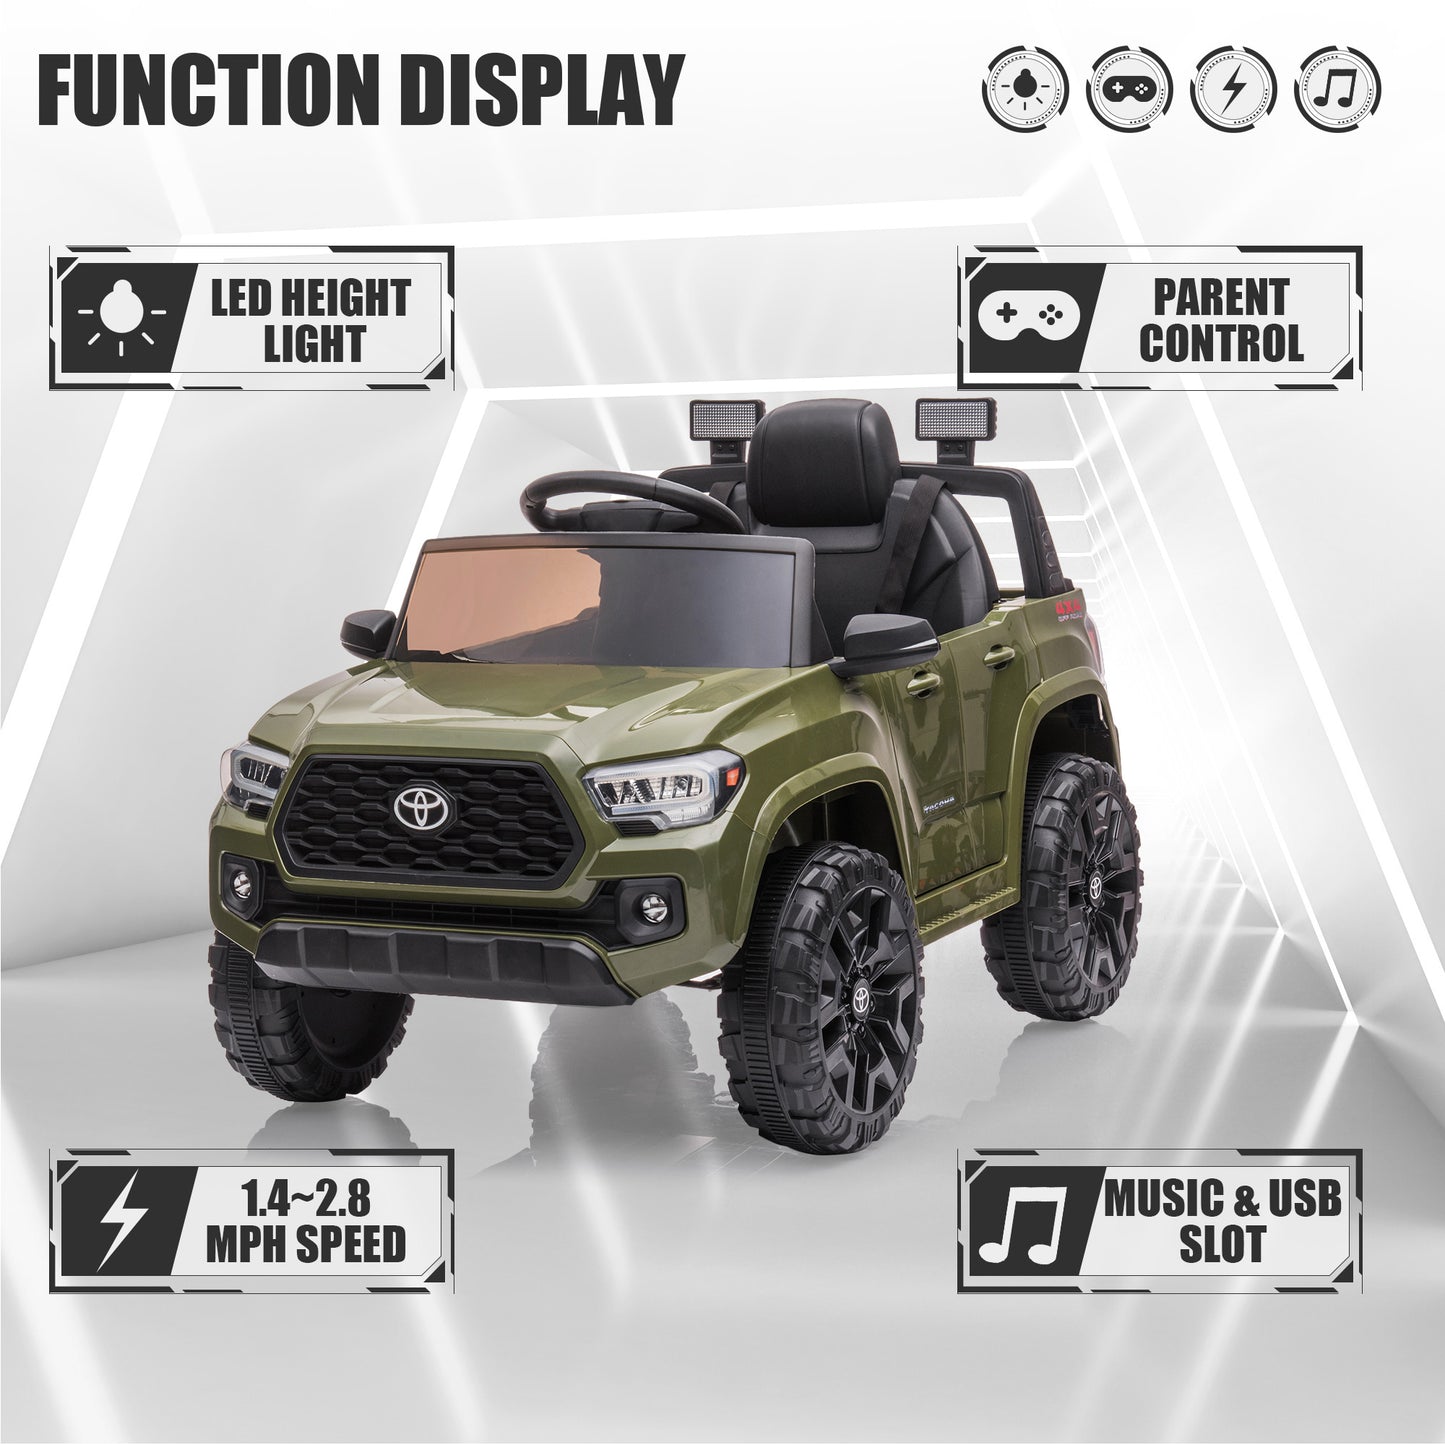 SYNGAR Kids 12V Licensed Toyota Tacoma Powered Ride on Car, Electric Ride on Toy with Remote Control, MP3 Player and LED Lights, Battery Powered Car Vehicle for Kids Boys Girls Gift, Green, Y018